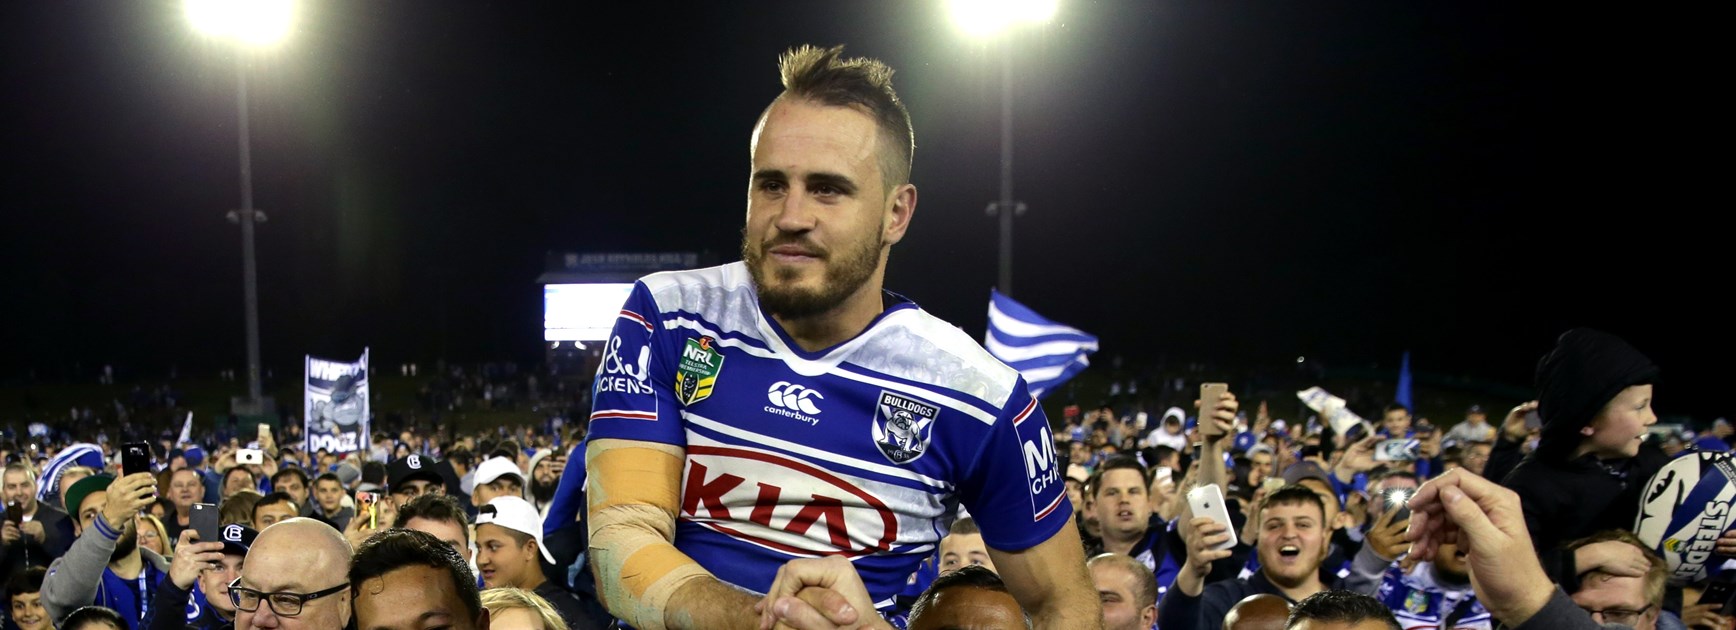 Josh Reynolds at his Belmore farewell in 2017.